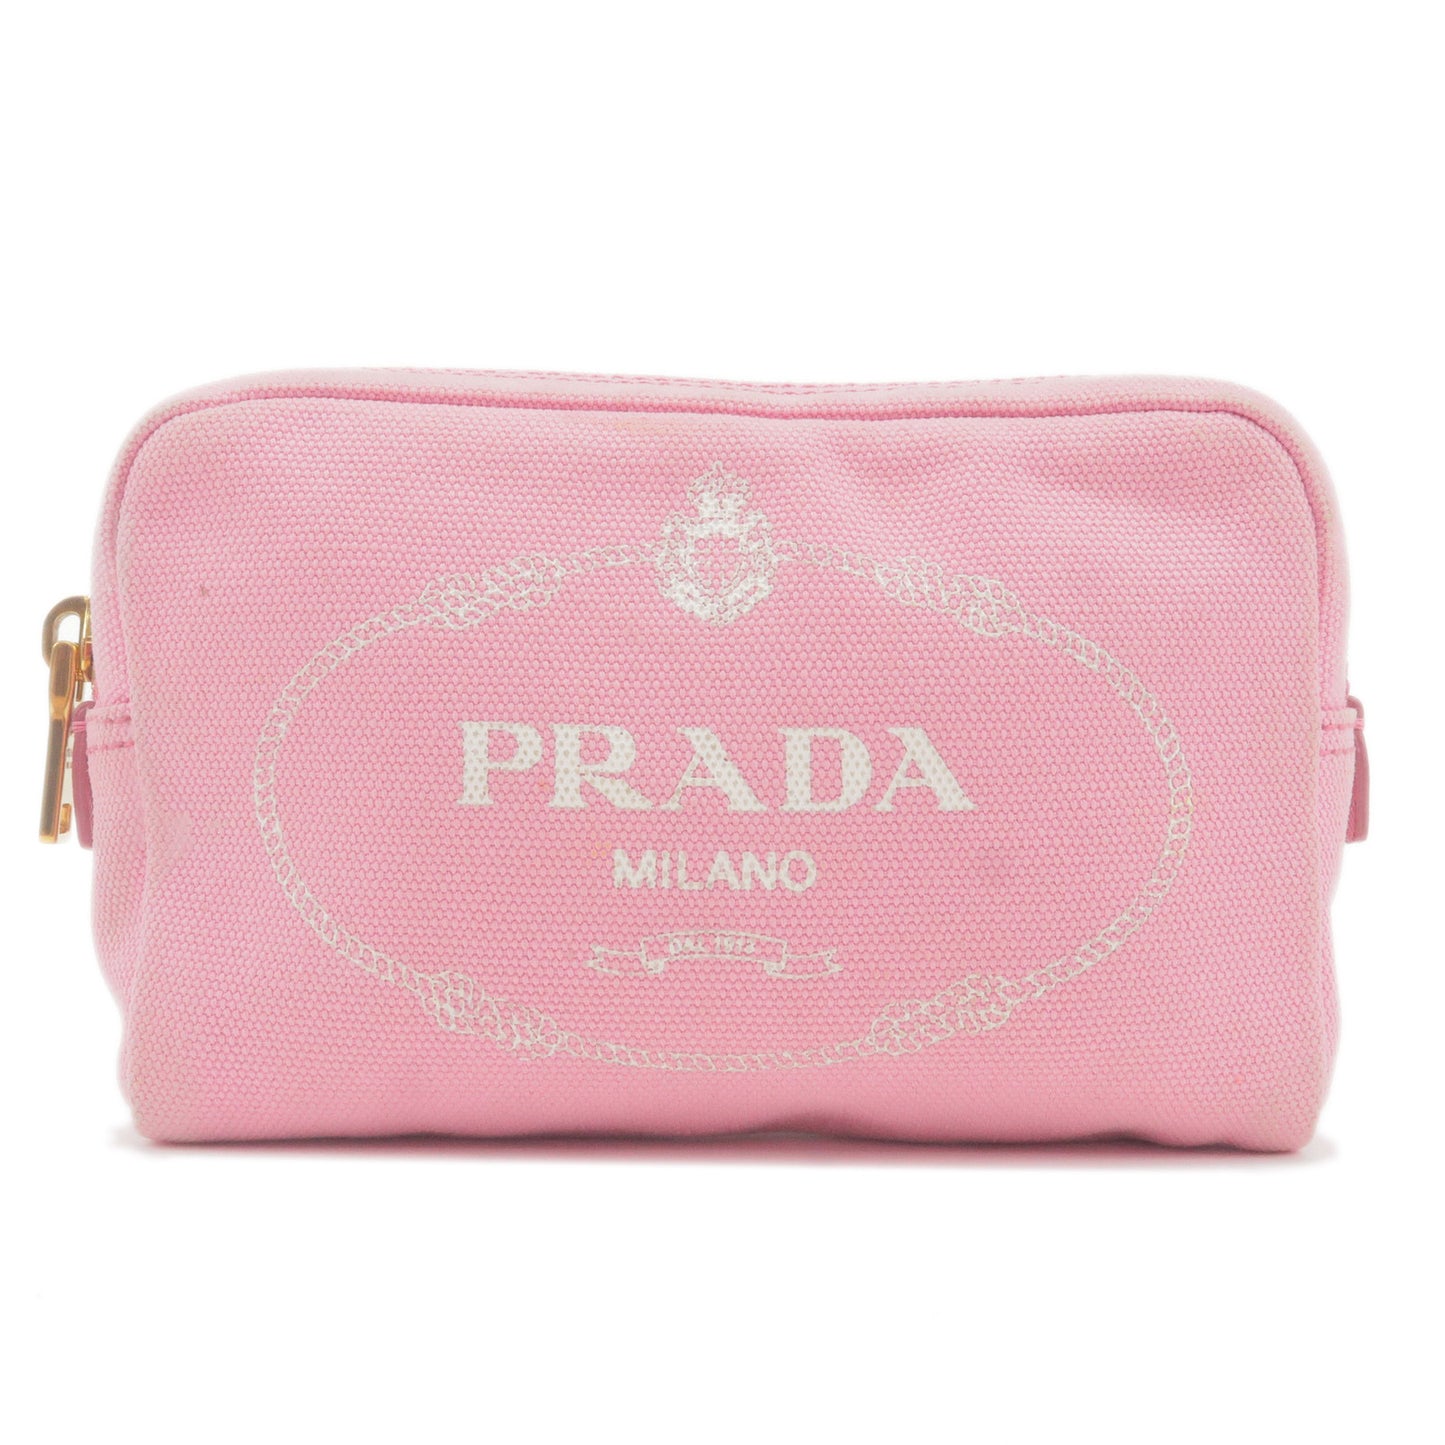 PRADA-Logo-Canvas-Leather-Canapa-Pouch-Pink-1NA021